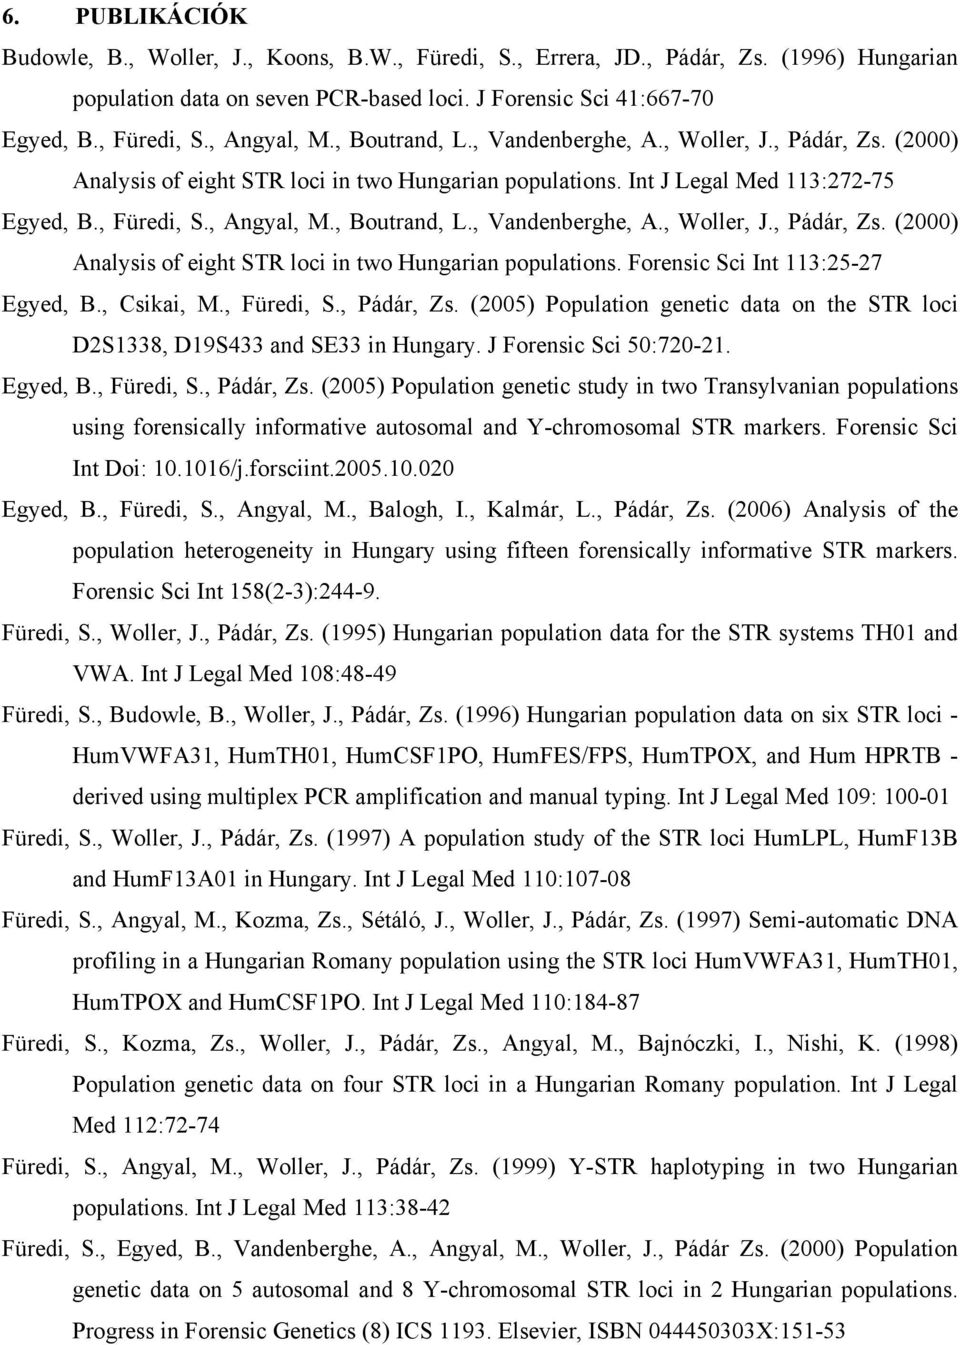 , Csikai, M., Füredi, S., Pádár, Zs. (2005) Population genetic data on the STR loci D2S1338, D19S433 and SE33 in Hungary. J Forensic Sci 50:720-21. Egyed, B., Füredi, S., Pádár, Zs. (2005) Population genetic study in two Transylvanian populations using forensically informative autosomal and Y-chromosomal STR markers.